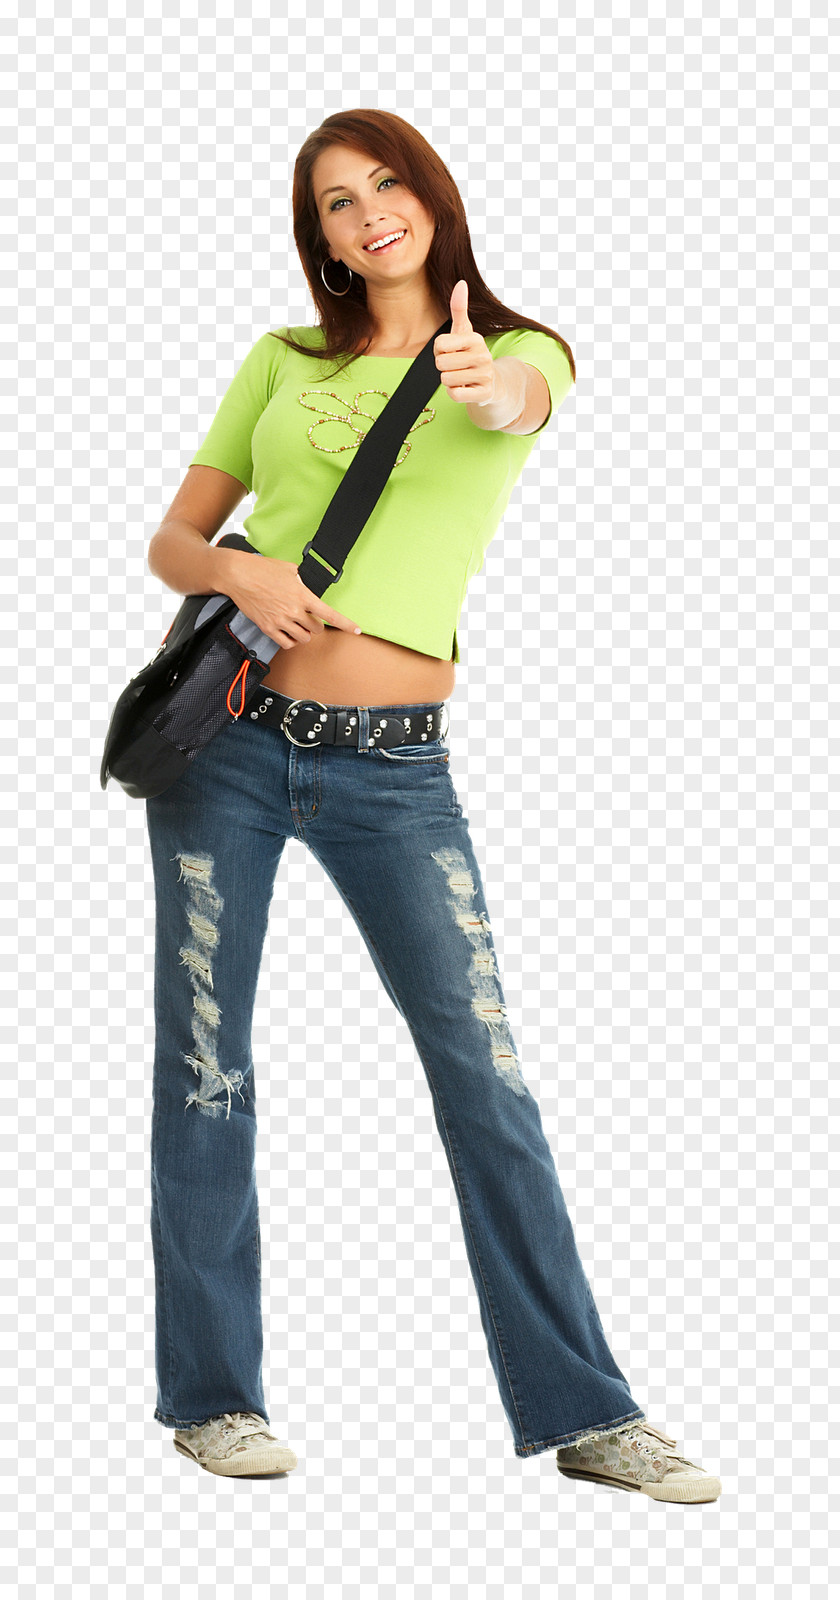 University Of Palermo Guelph St. Clair College Student PNG of Student, graduate girl clipart PNG